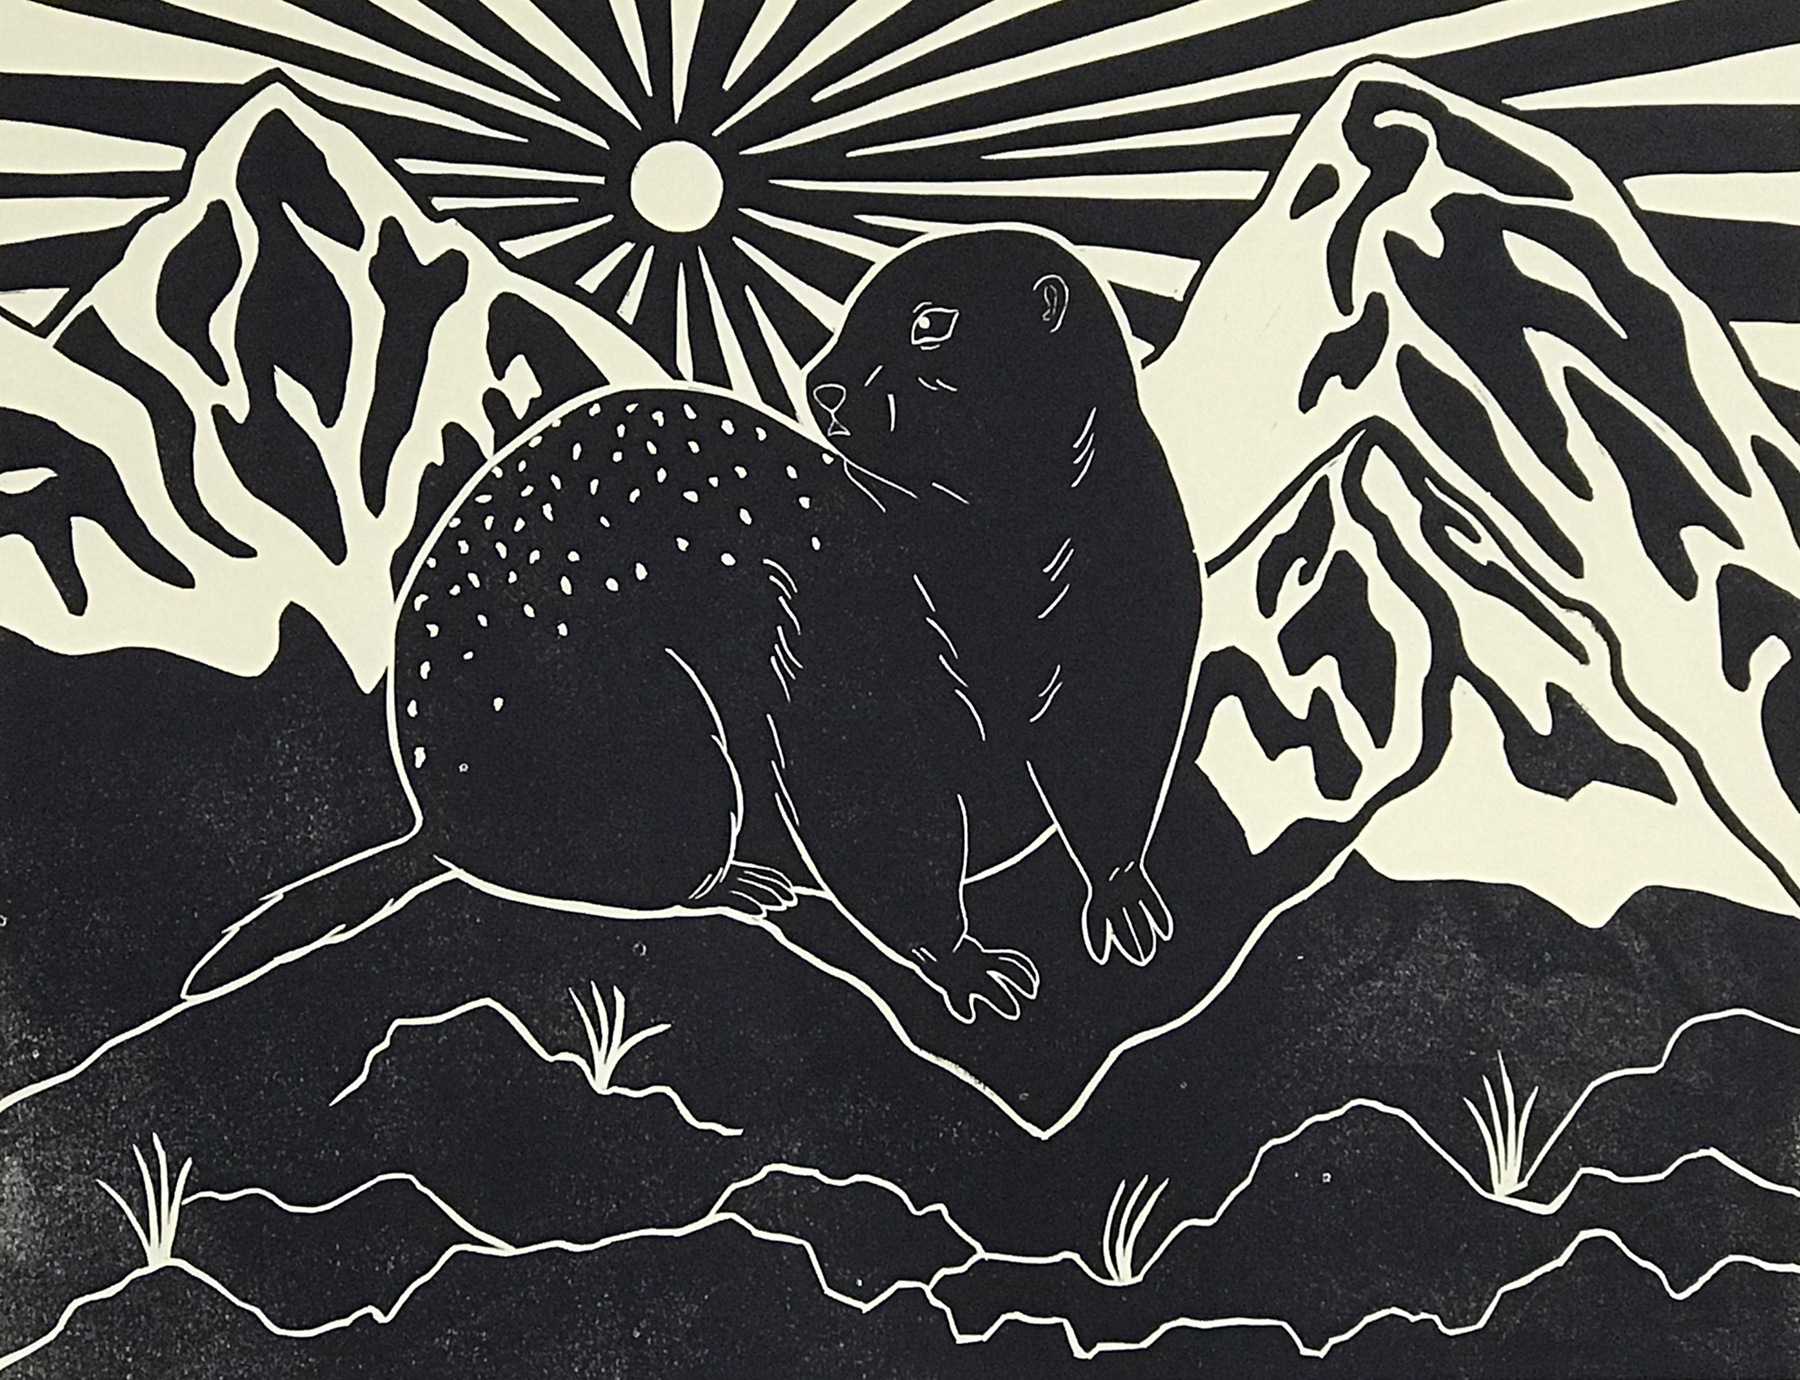 Black and white print of a pine marten with mountains and the sun in the background, courtesy of the artist